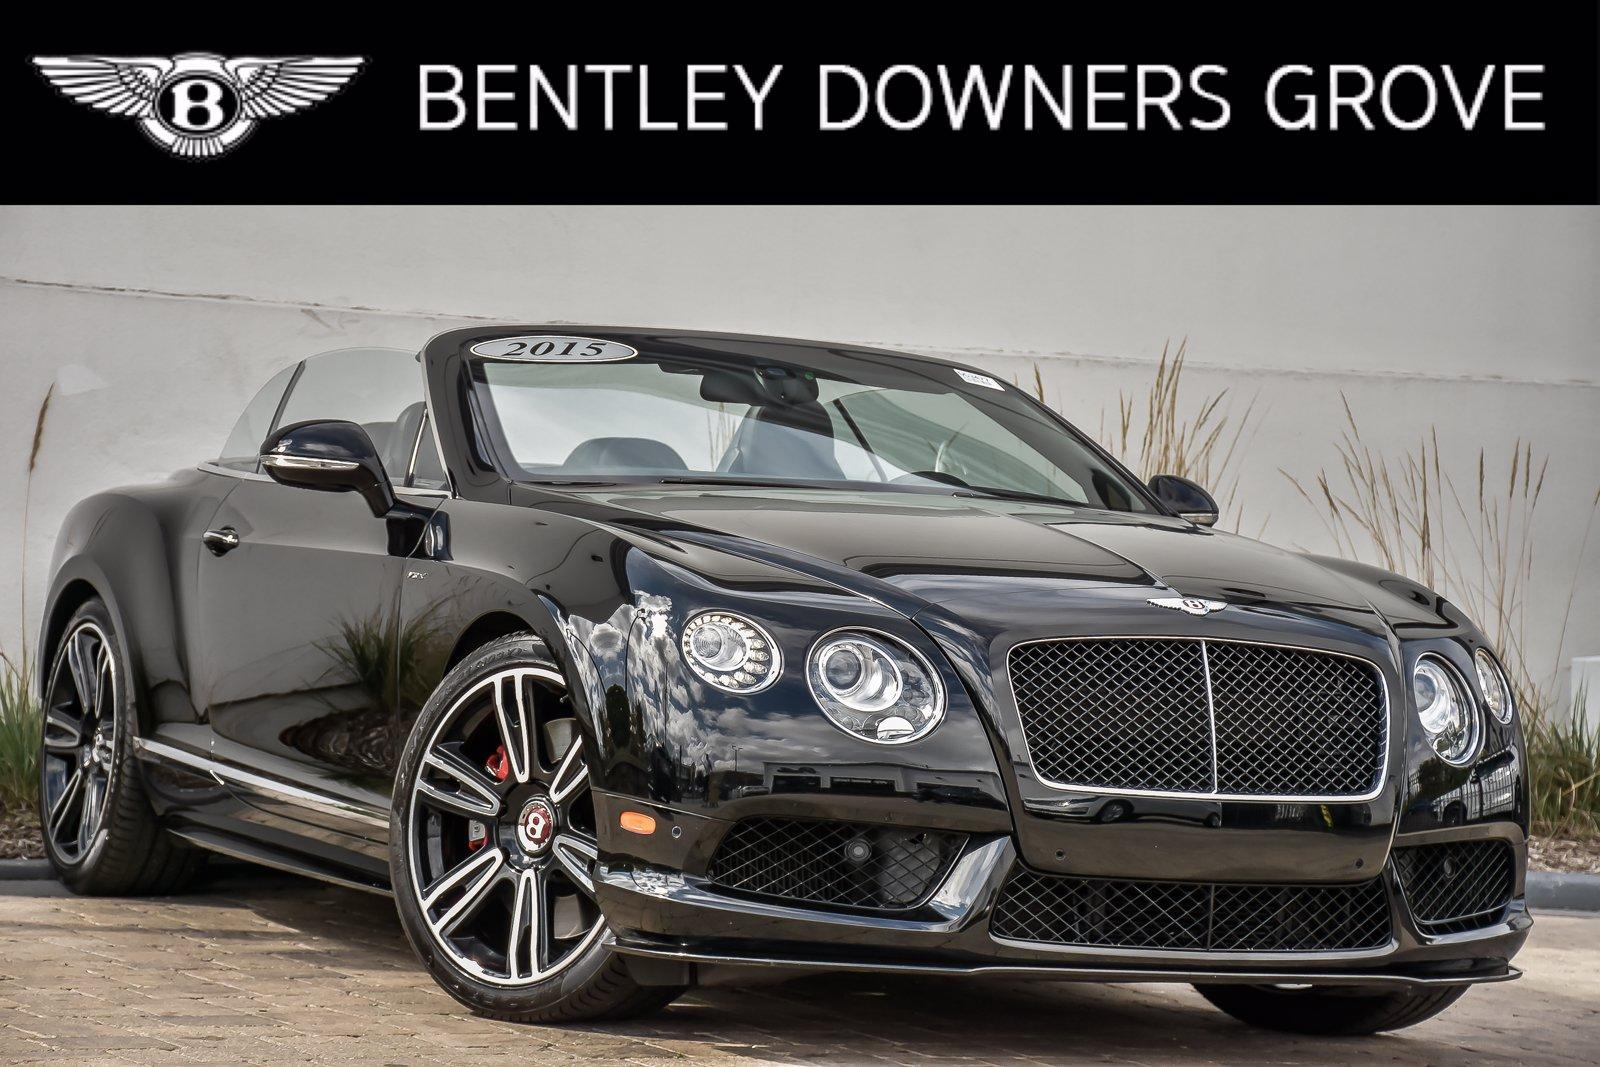 Used 2015 Bentley Continental GT V8 S Mulliner Convertible | Downers Grove, IL